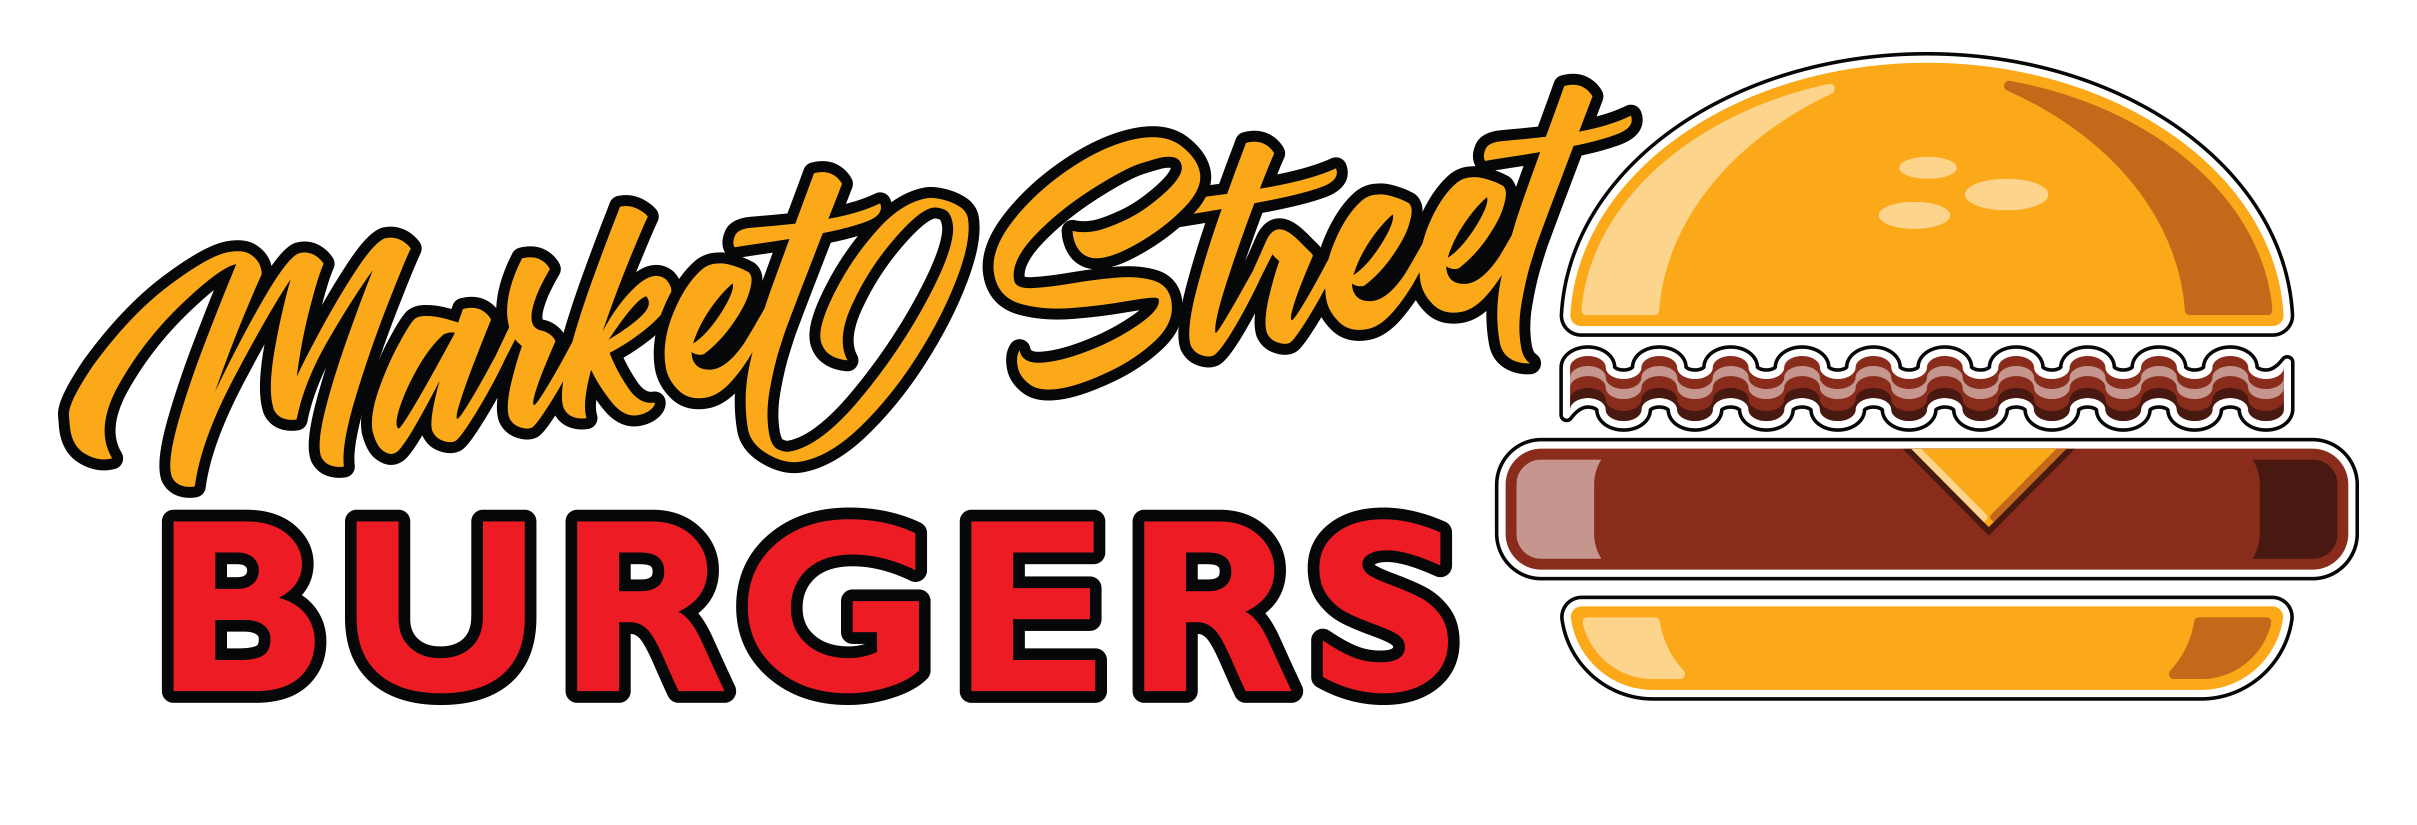 Welcome to Market Street Burgers